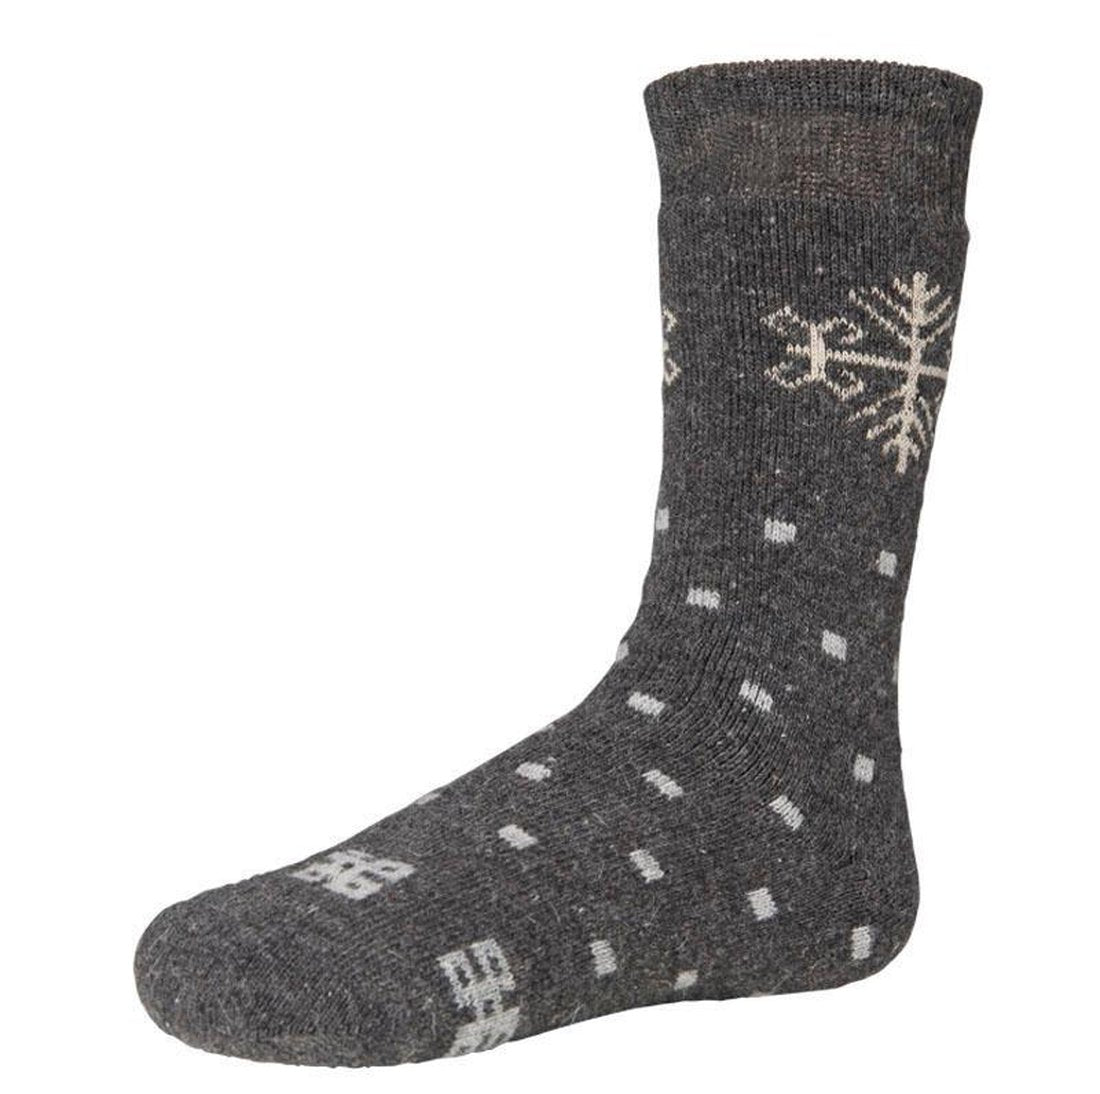 Ysabel Mora 12720 Snowflake Sock - Warm and cozy thick knitted grey socks with a touch of wool and angora, with a snowflake motif and all over dotted square pattern.